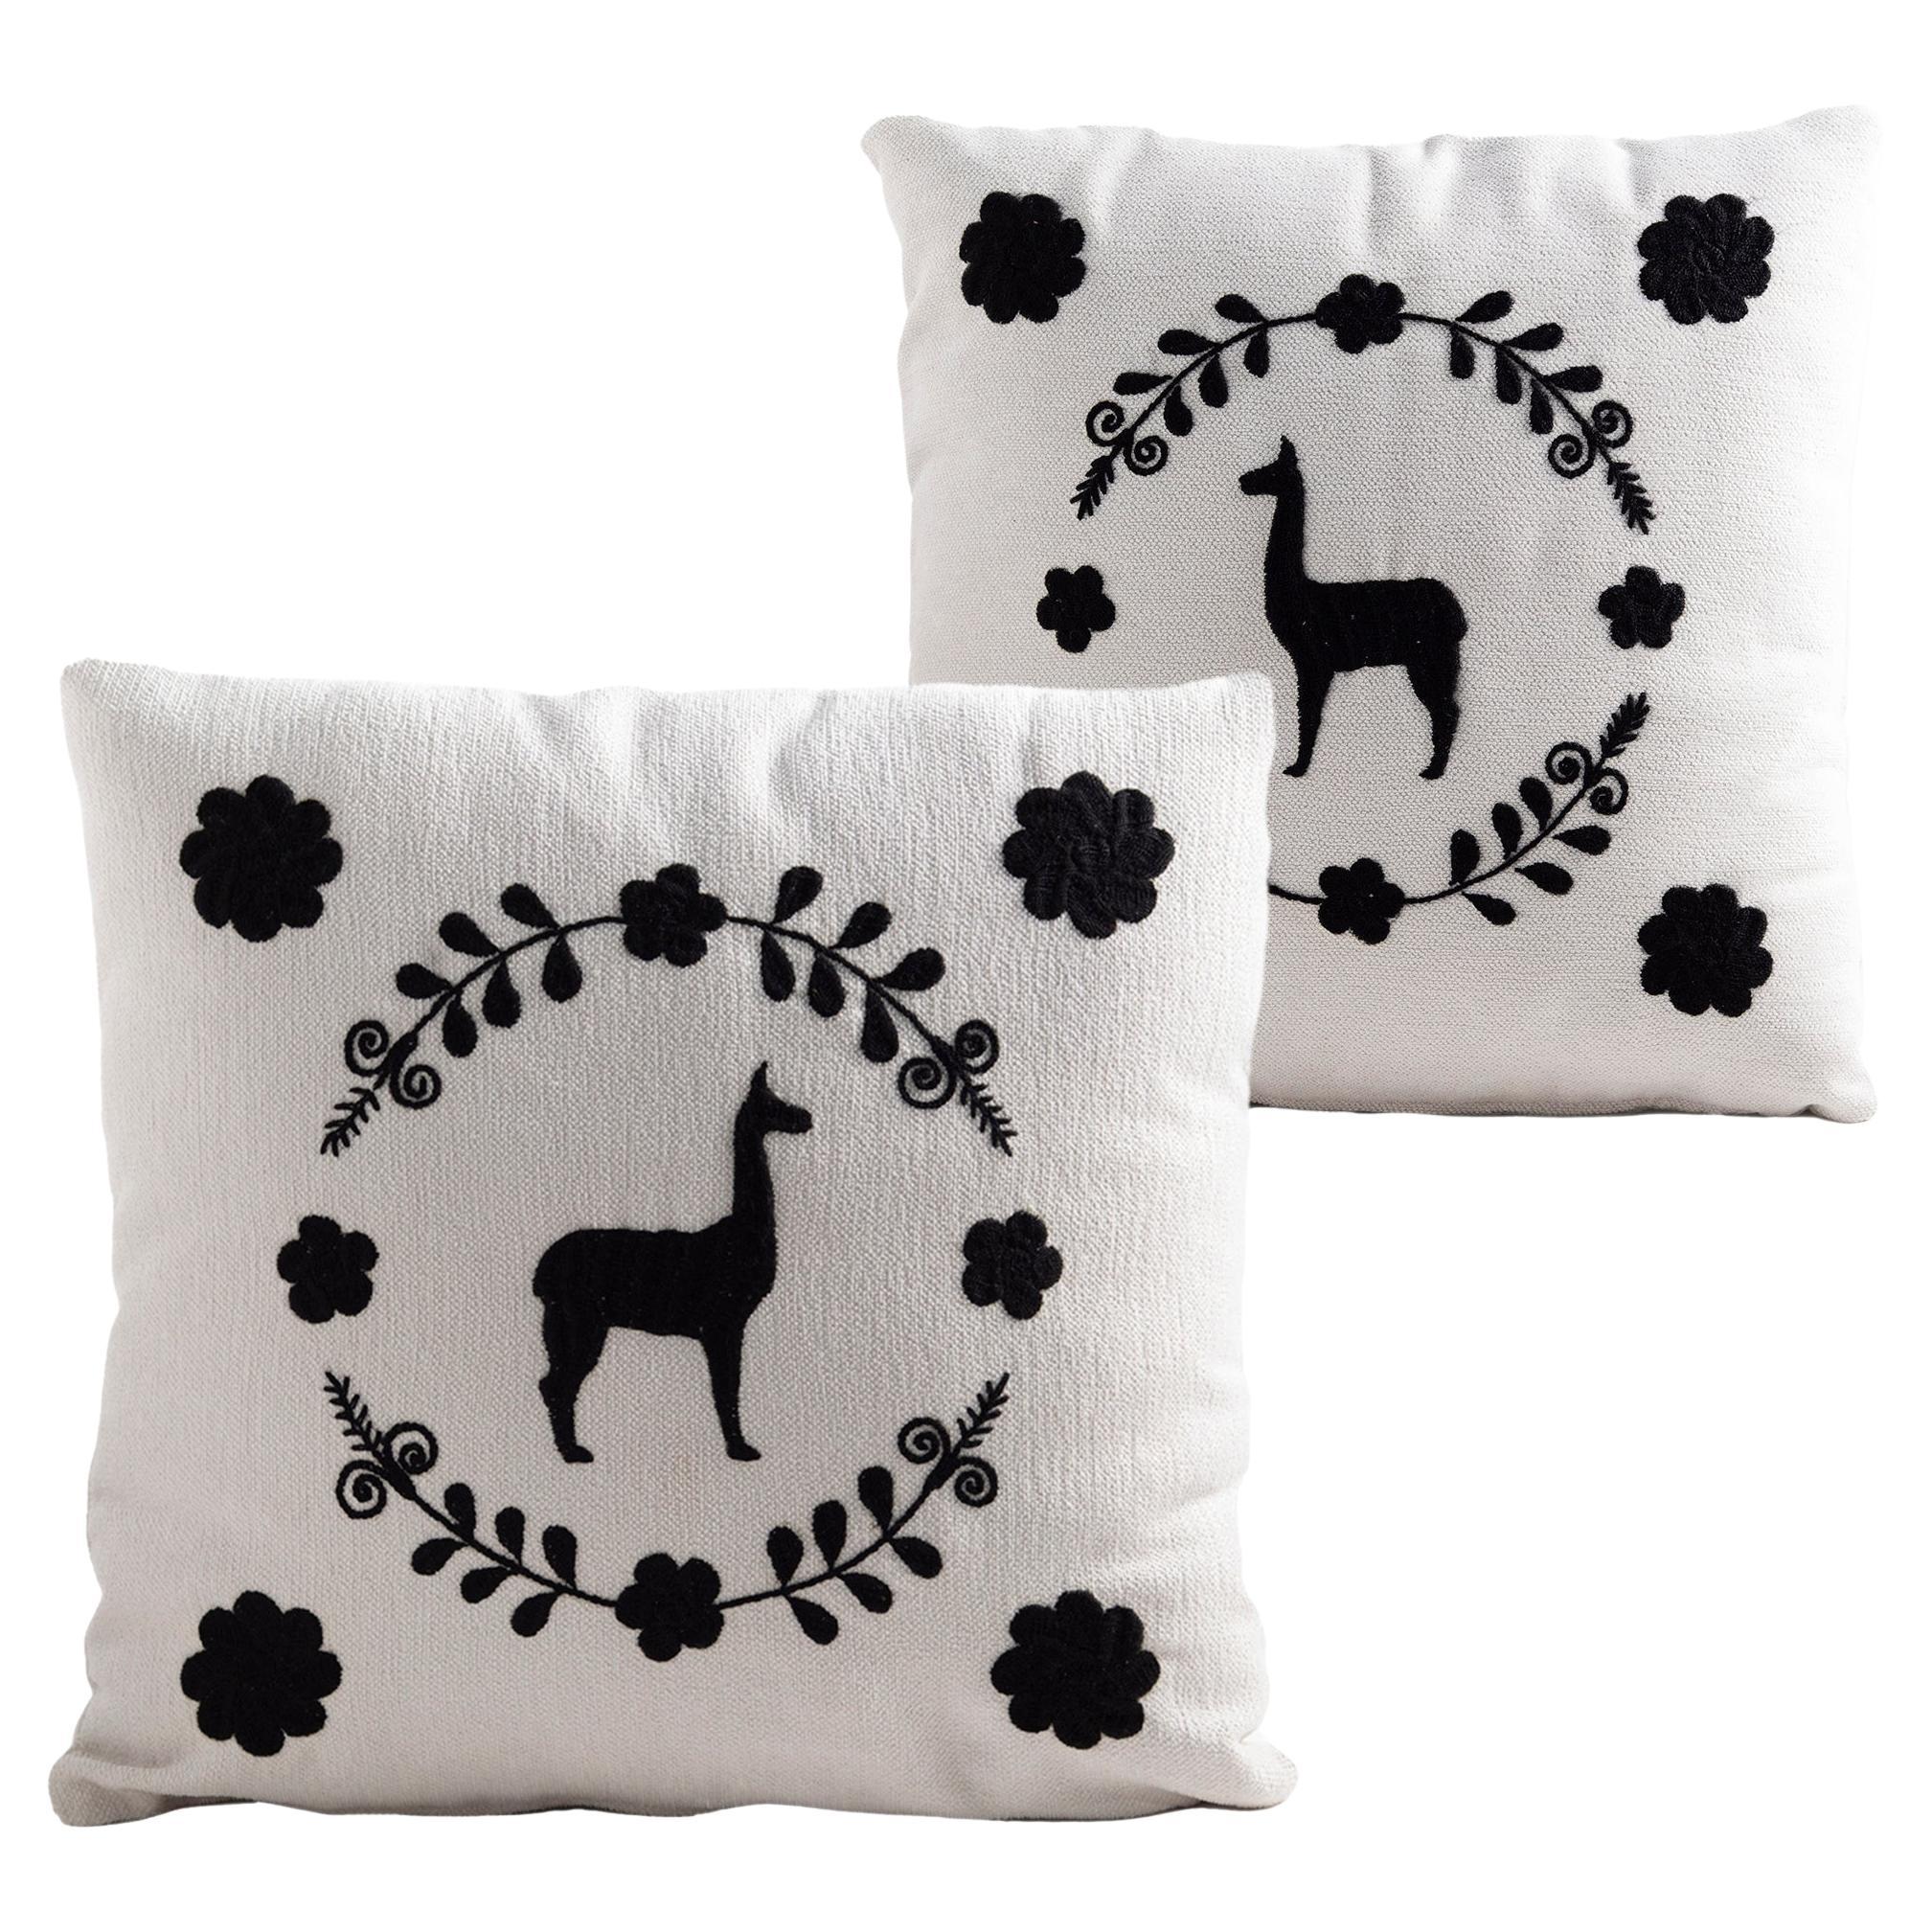 LLAMA Hand Embroidered Decorative Pillows Ivory Upholstery by ANDEAN, Set of 2